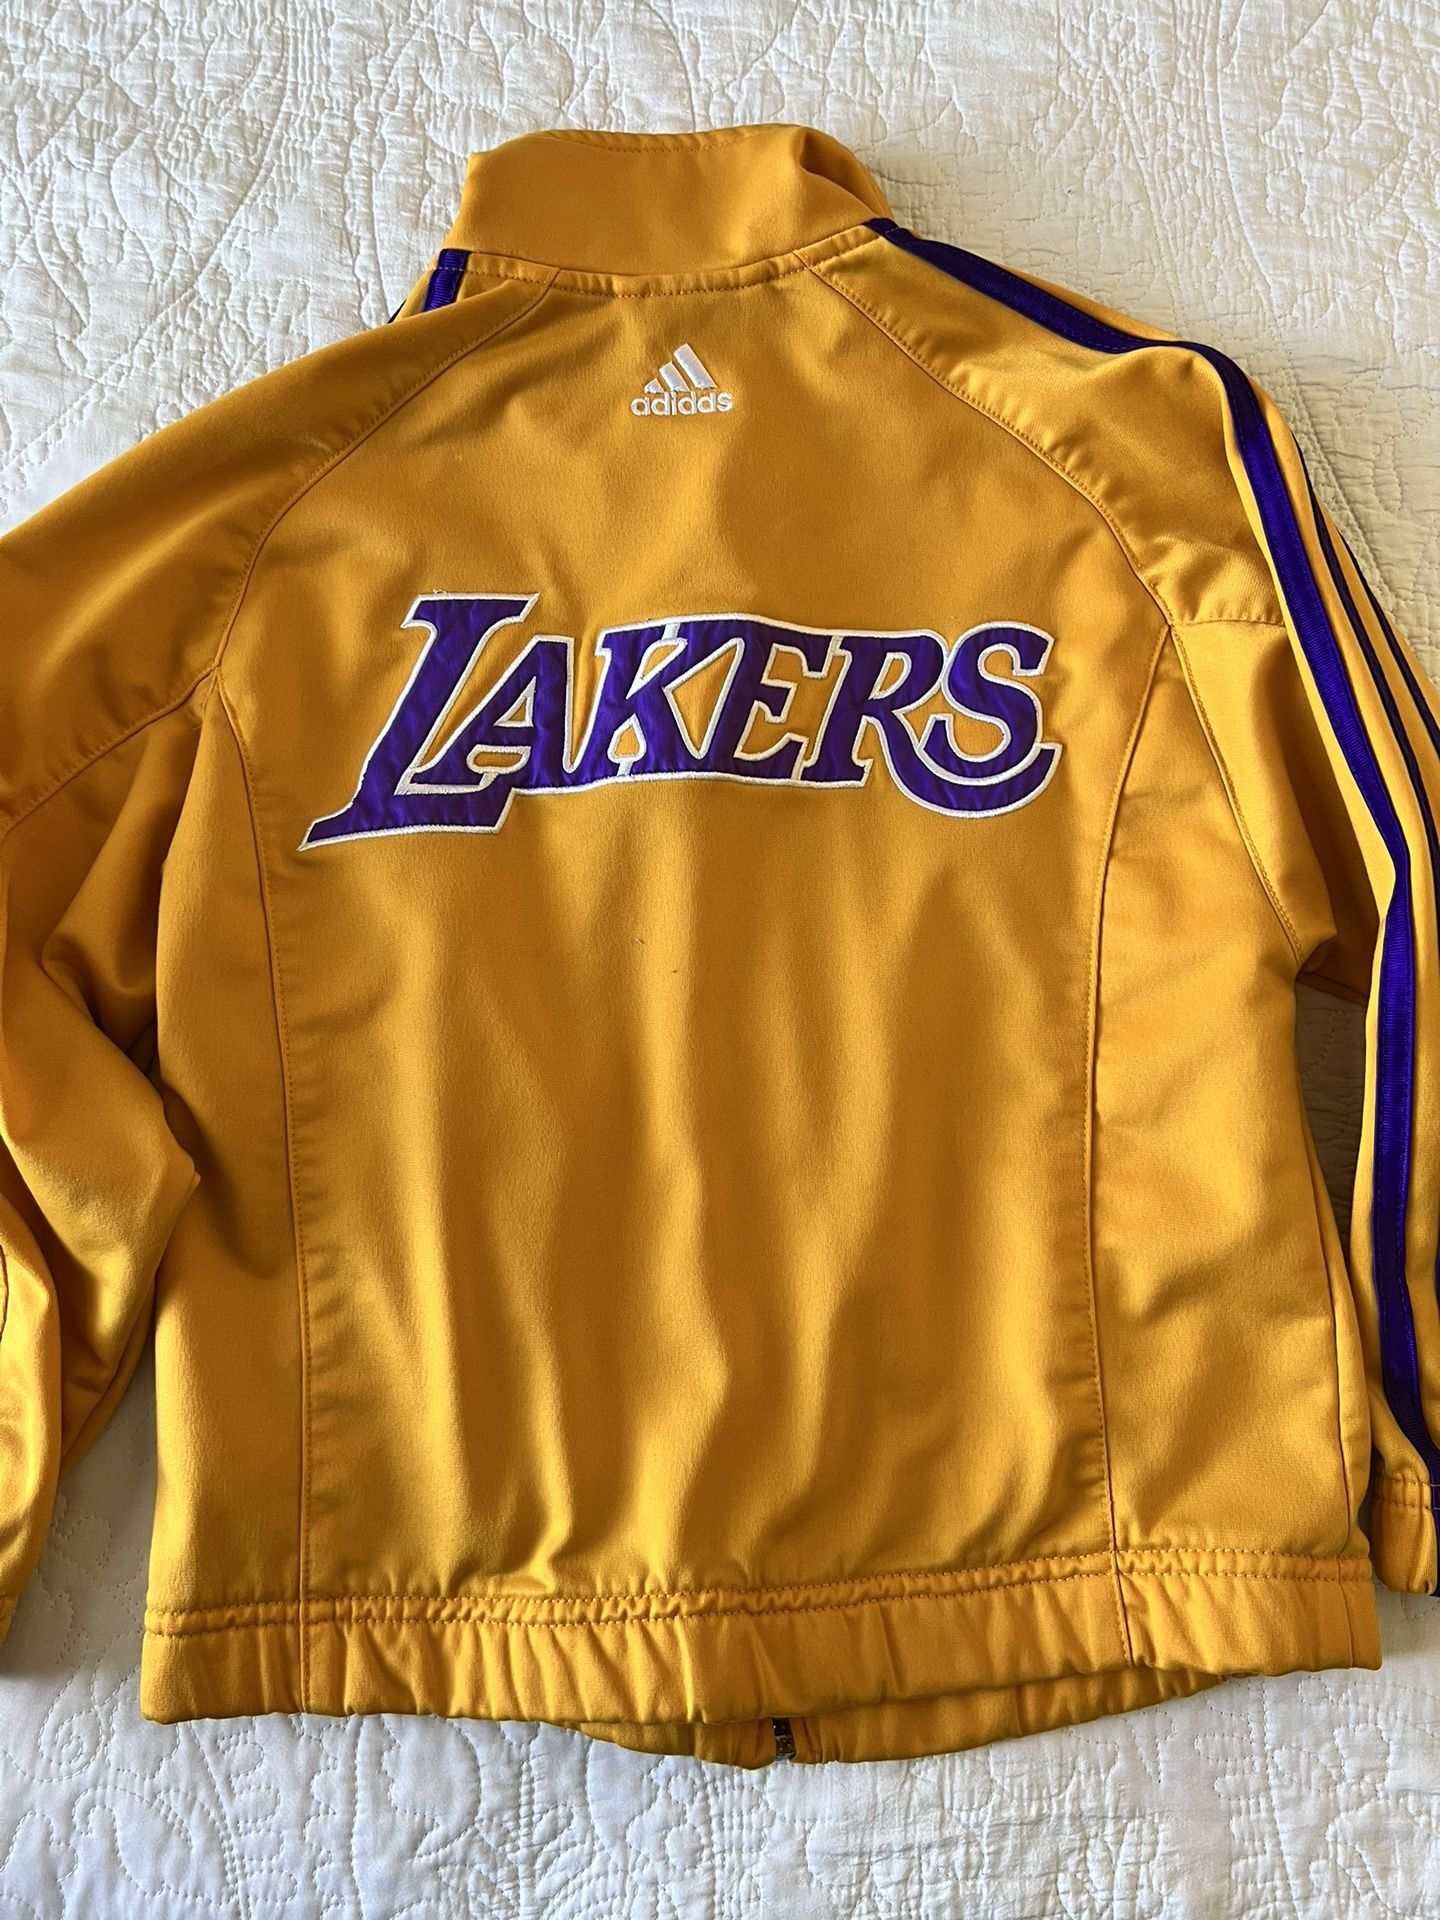 Vintage Lakers Jacket for Sale in Los Angeles, CA - OfferUp